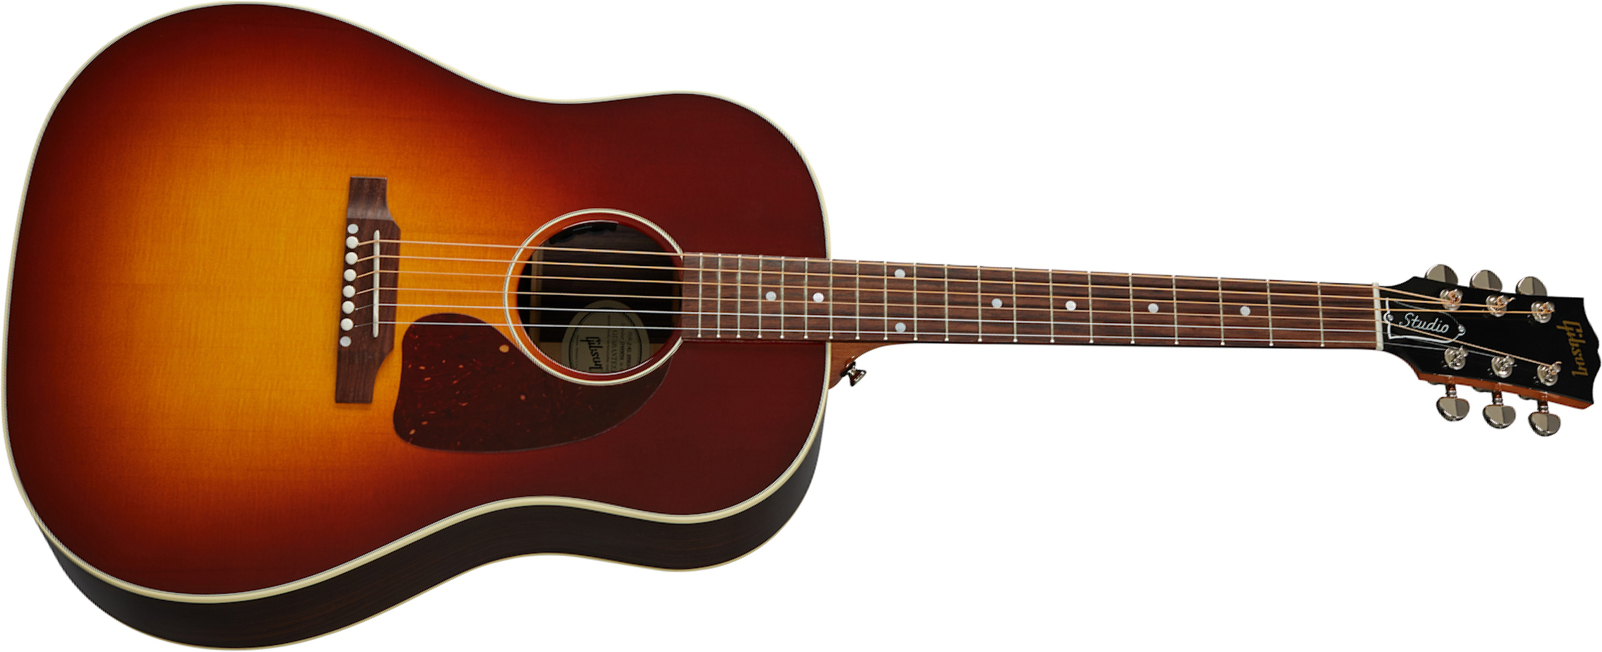 Gibson J-45 Studio Rosewood Modern 2020 Dreadnought Epicea Palissandre Rw - Rosewood Burst - Guitare Electro Acoustique - Main picture